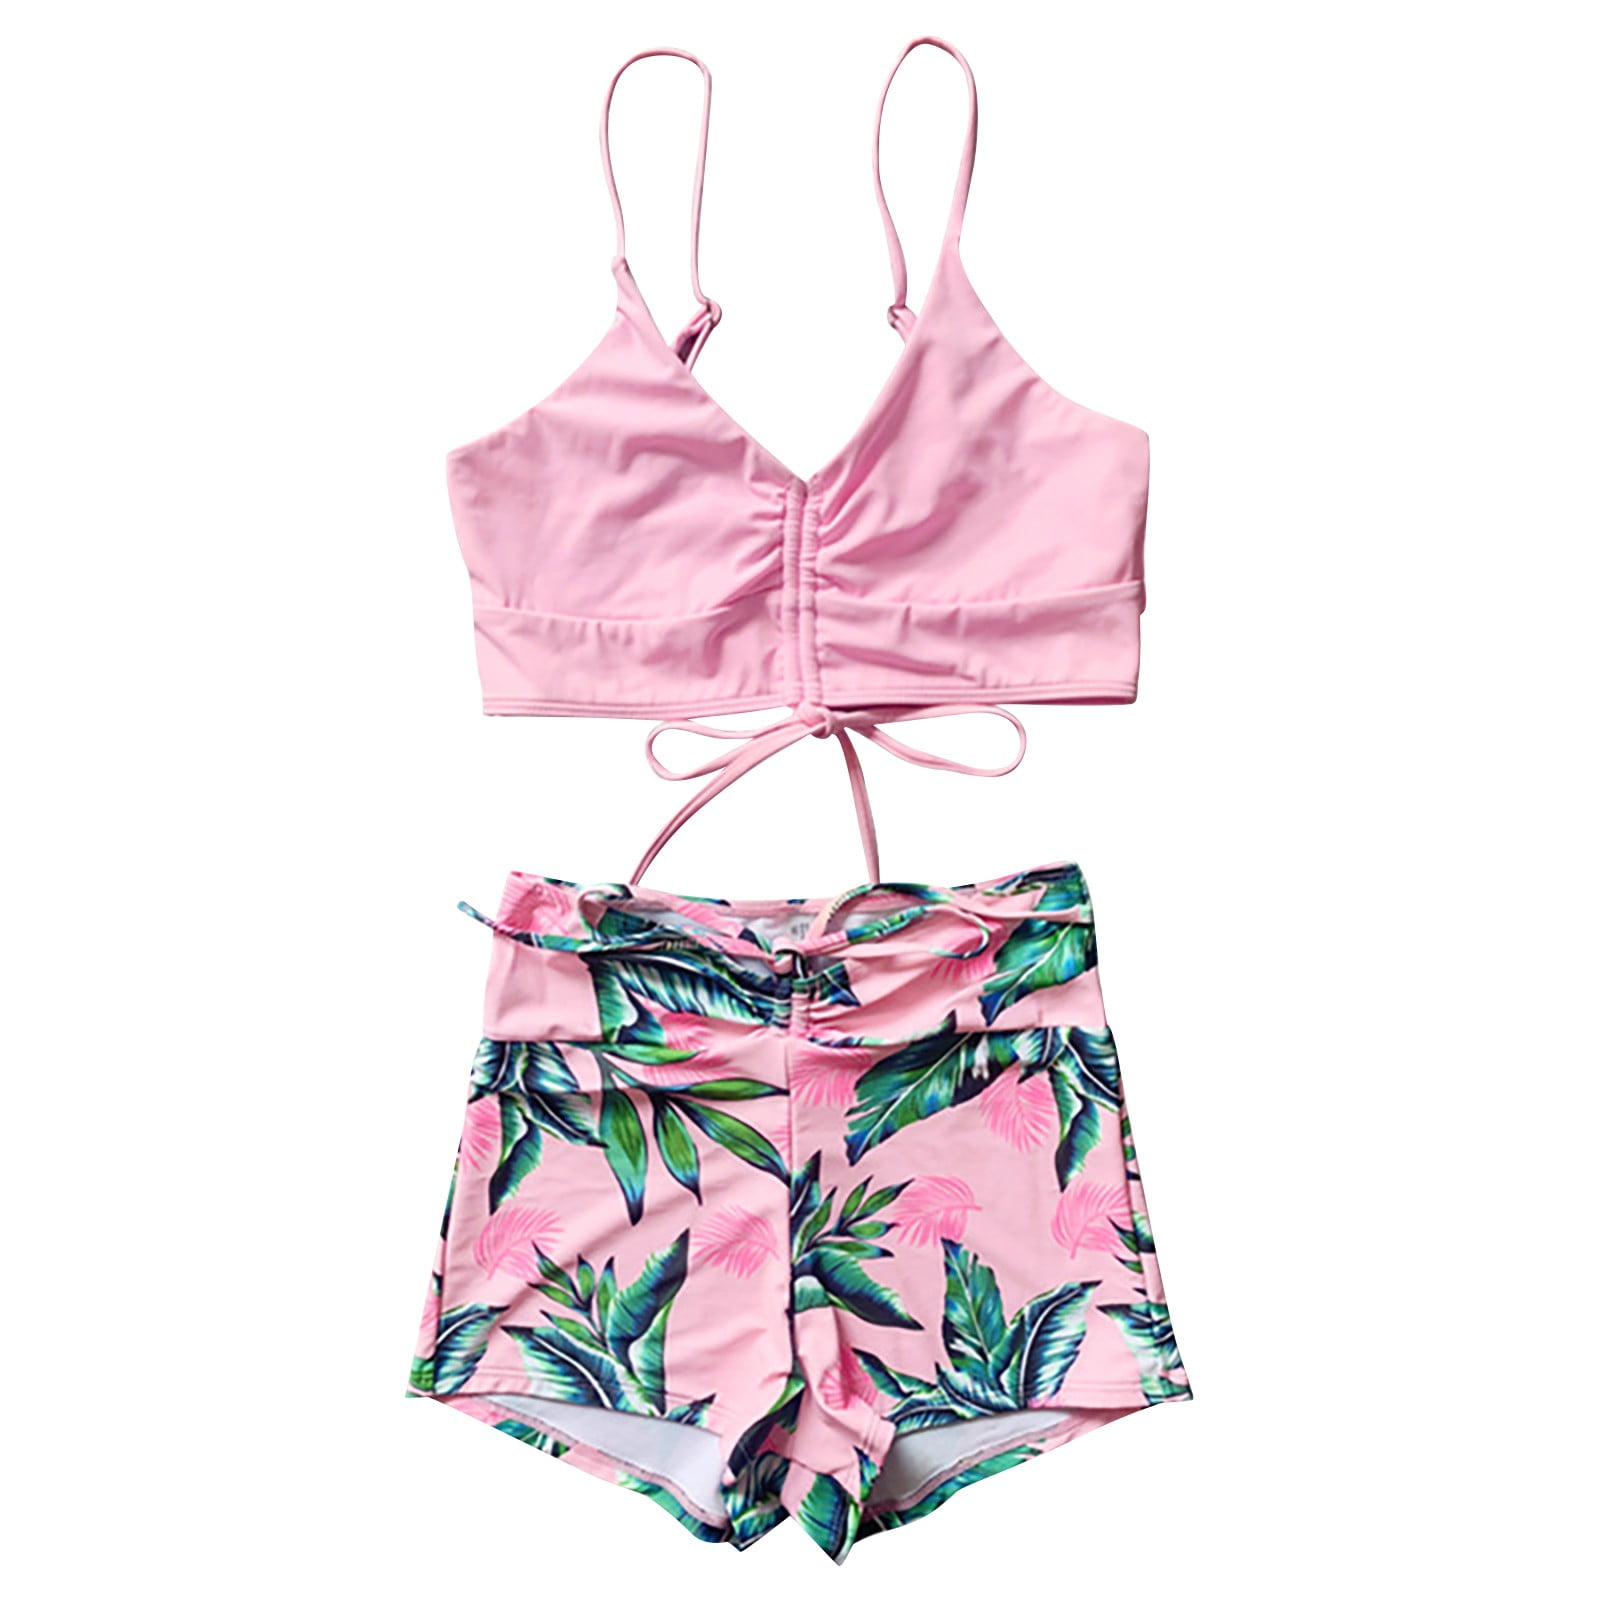 Designer Shark Swimsuit Set For Women Push Up Vest, Plus Size Workout  Tanks, And Shorts Beachwear Trunk Pants Bathing Suit D72705 From  Pinkaboo_trade, $18.32